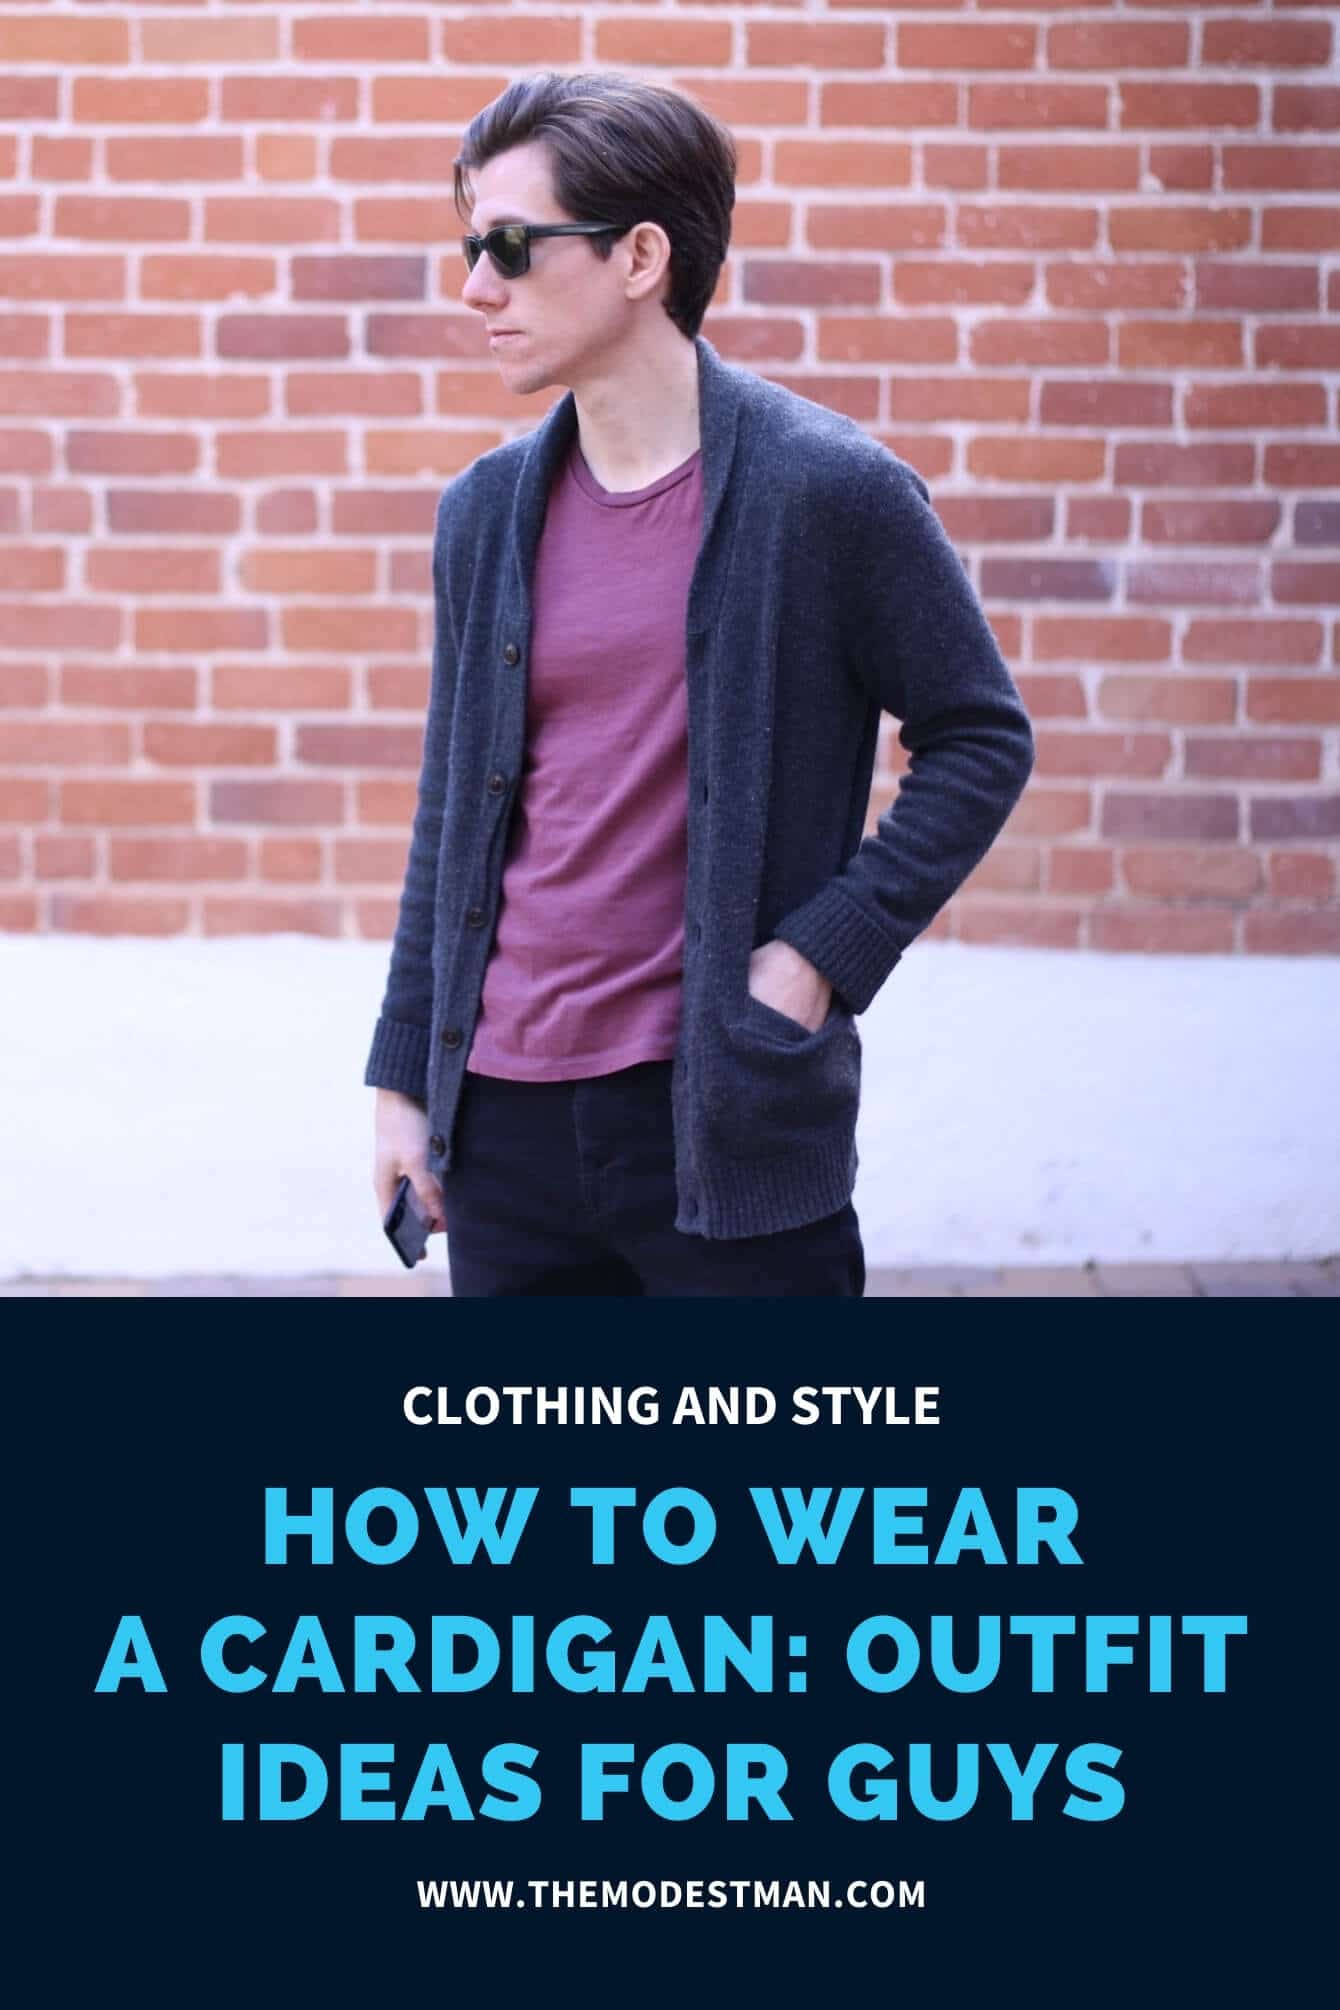 How to Wear a Sweatshirt with 10 Outfit Ideas